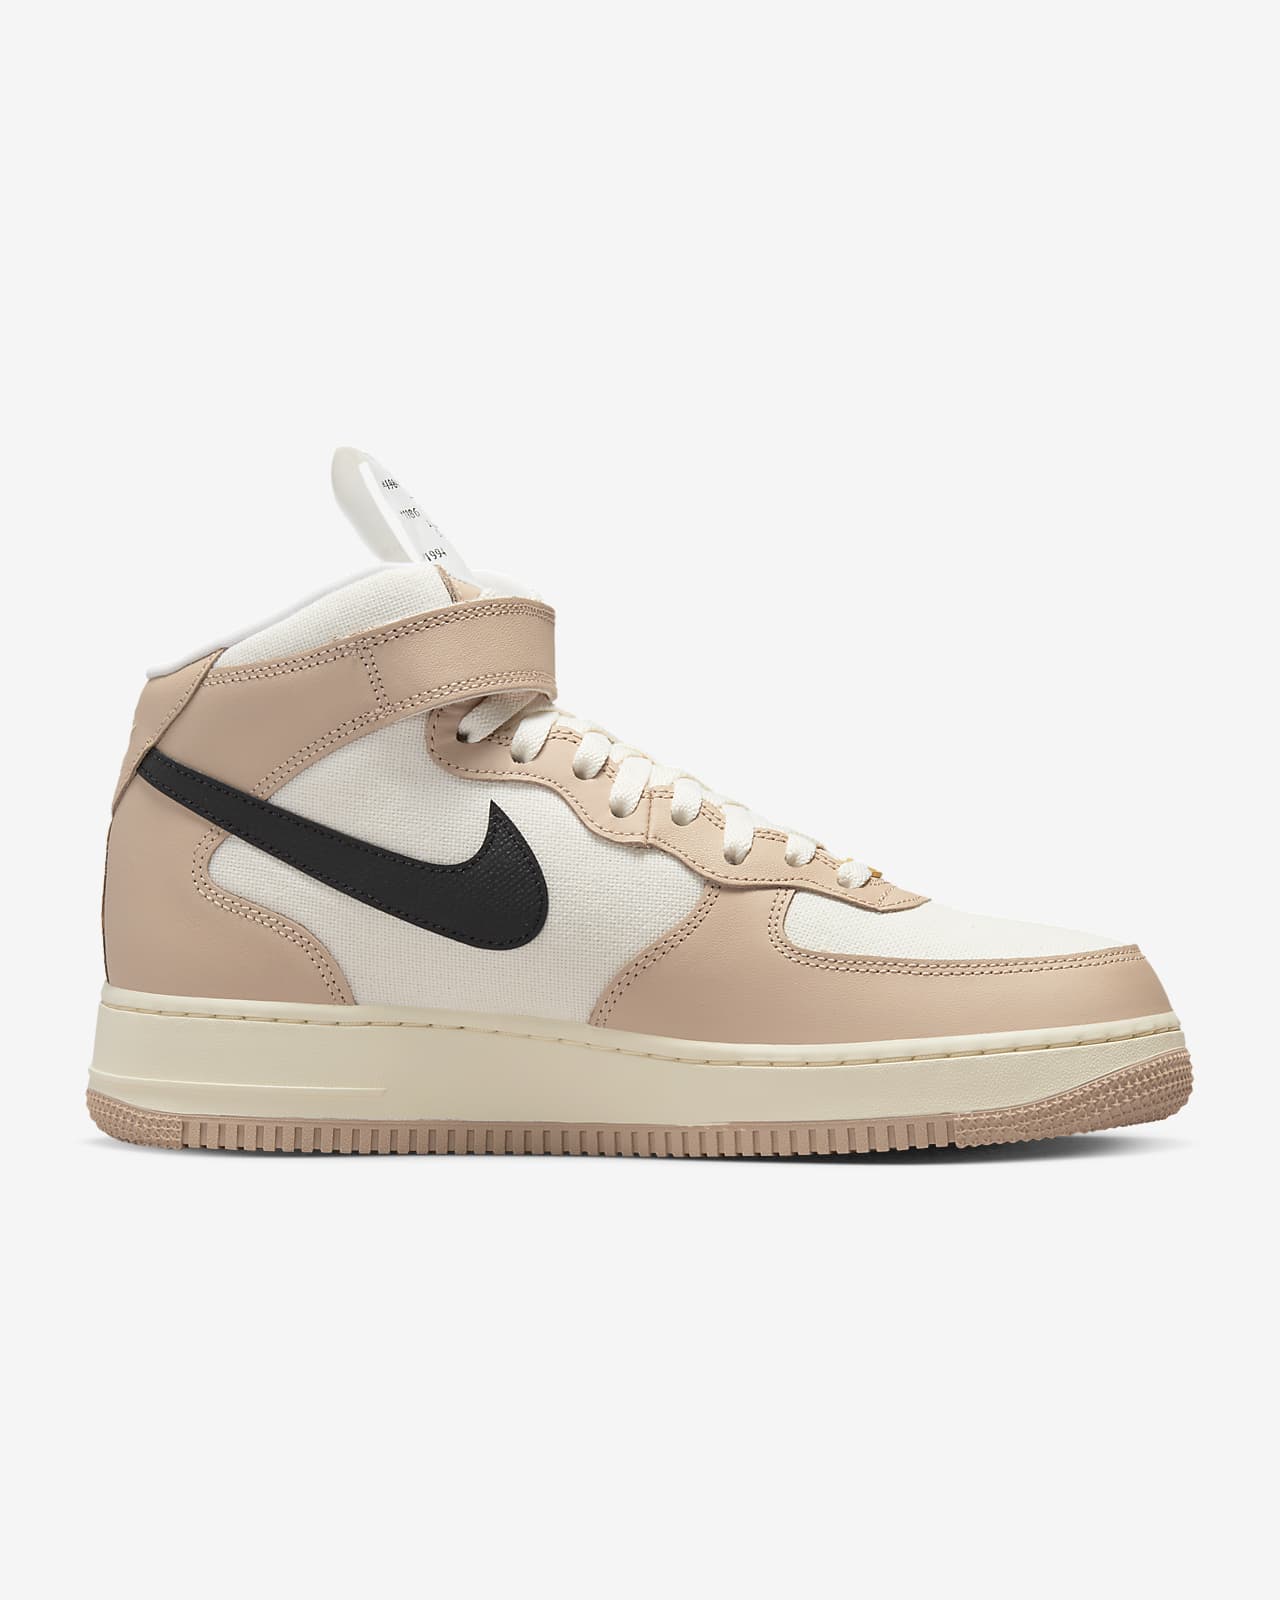 Nike Air Force 1 '07 LX Men's Shoes